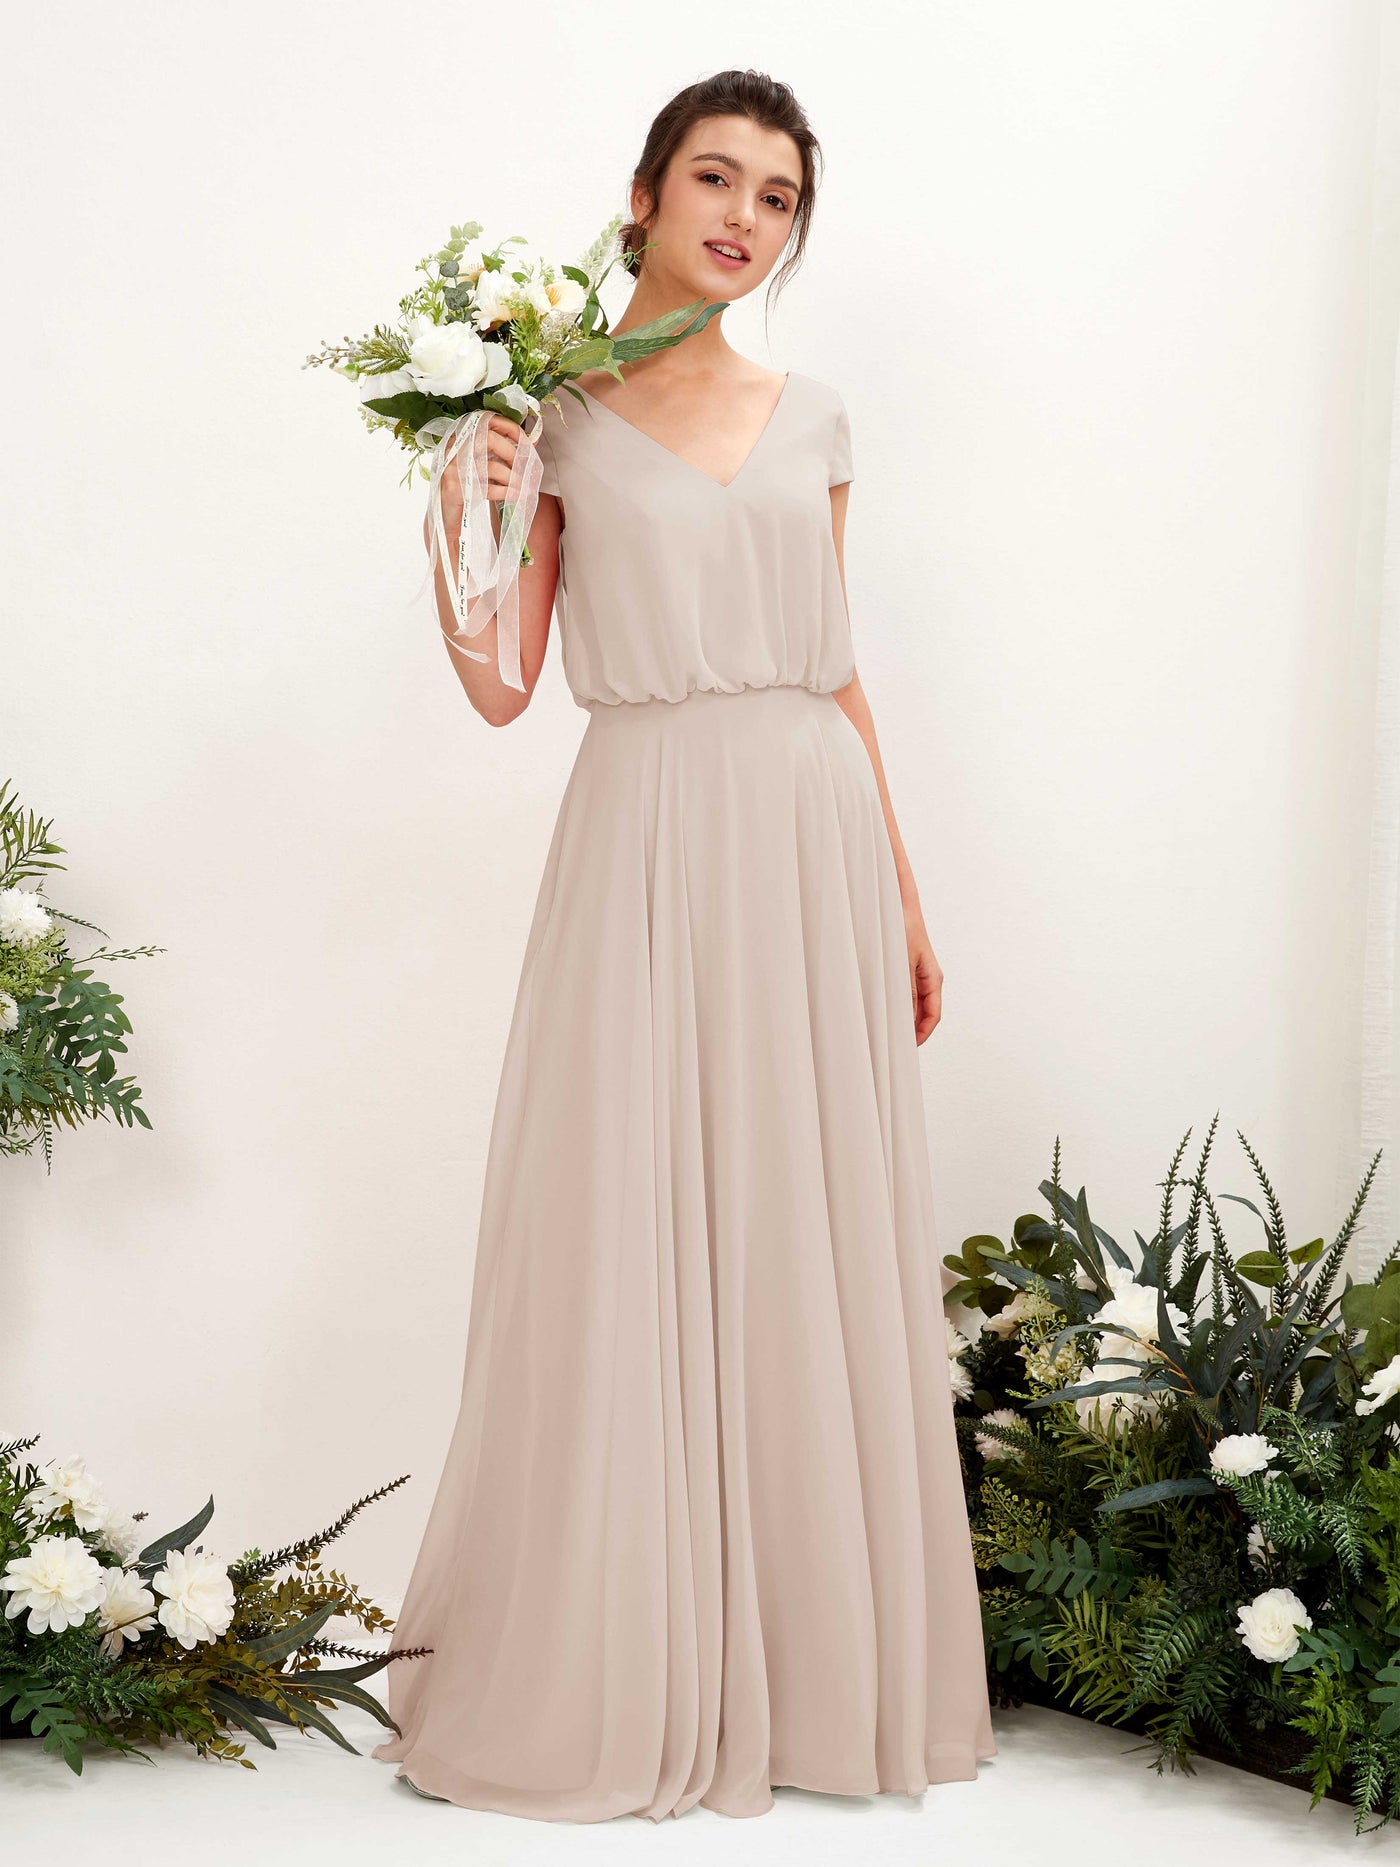 Champagne Bridesmaid Dresses Bridesmaid Dress A-line Chiffon V-neck Full Length Short Sleeves Wedding Party Dress (81221816)#color_champagne